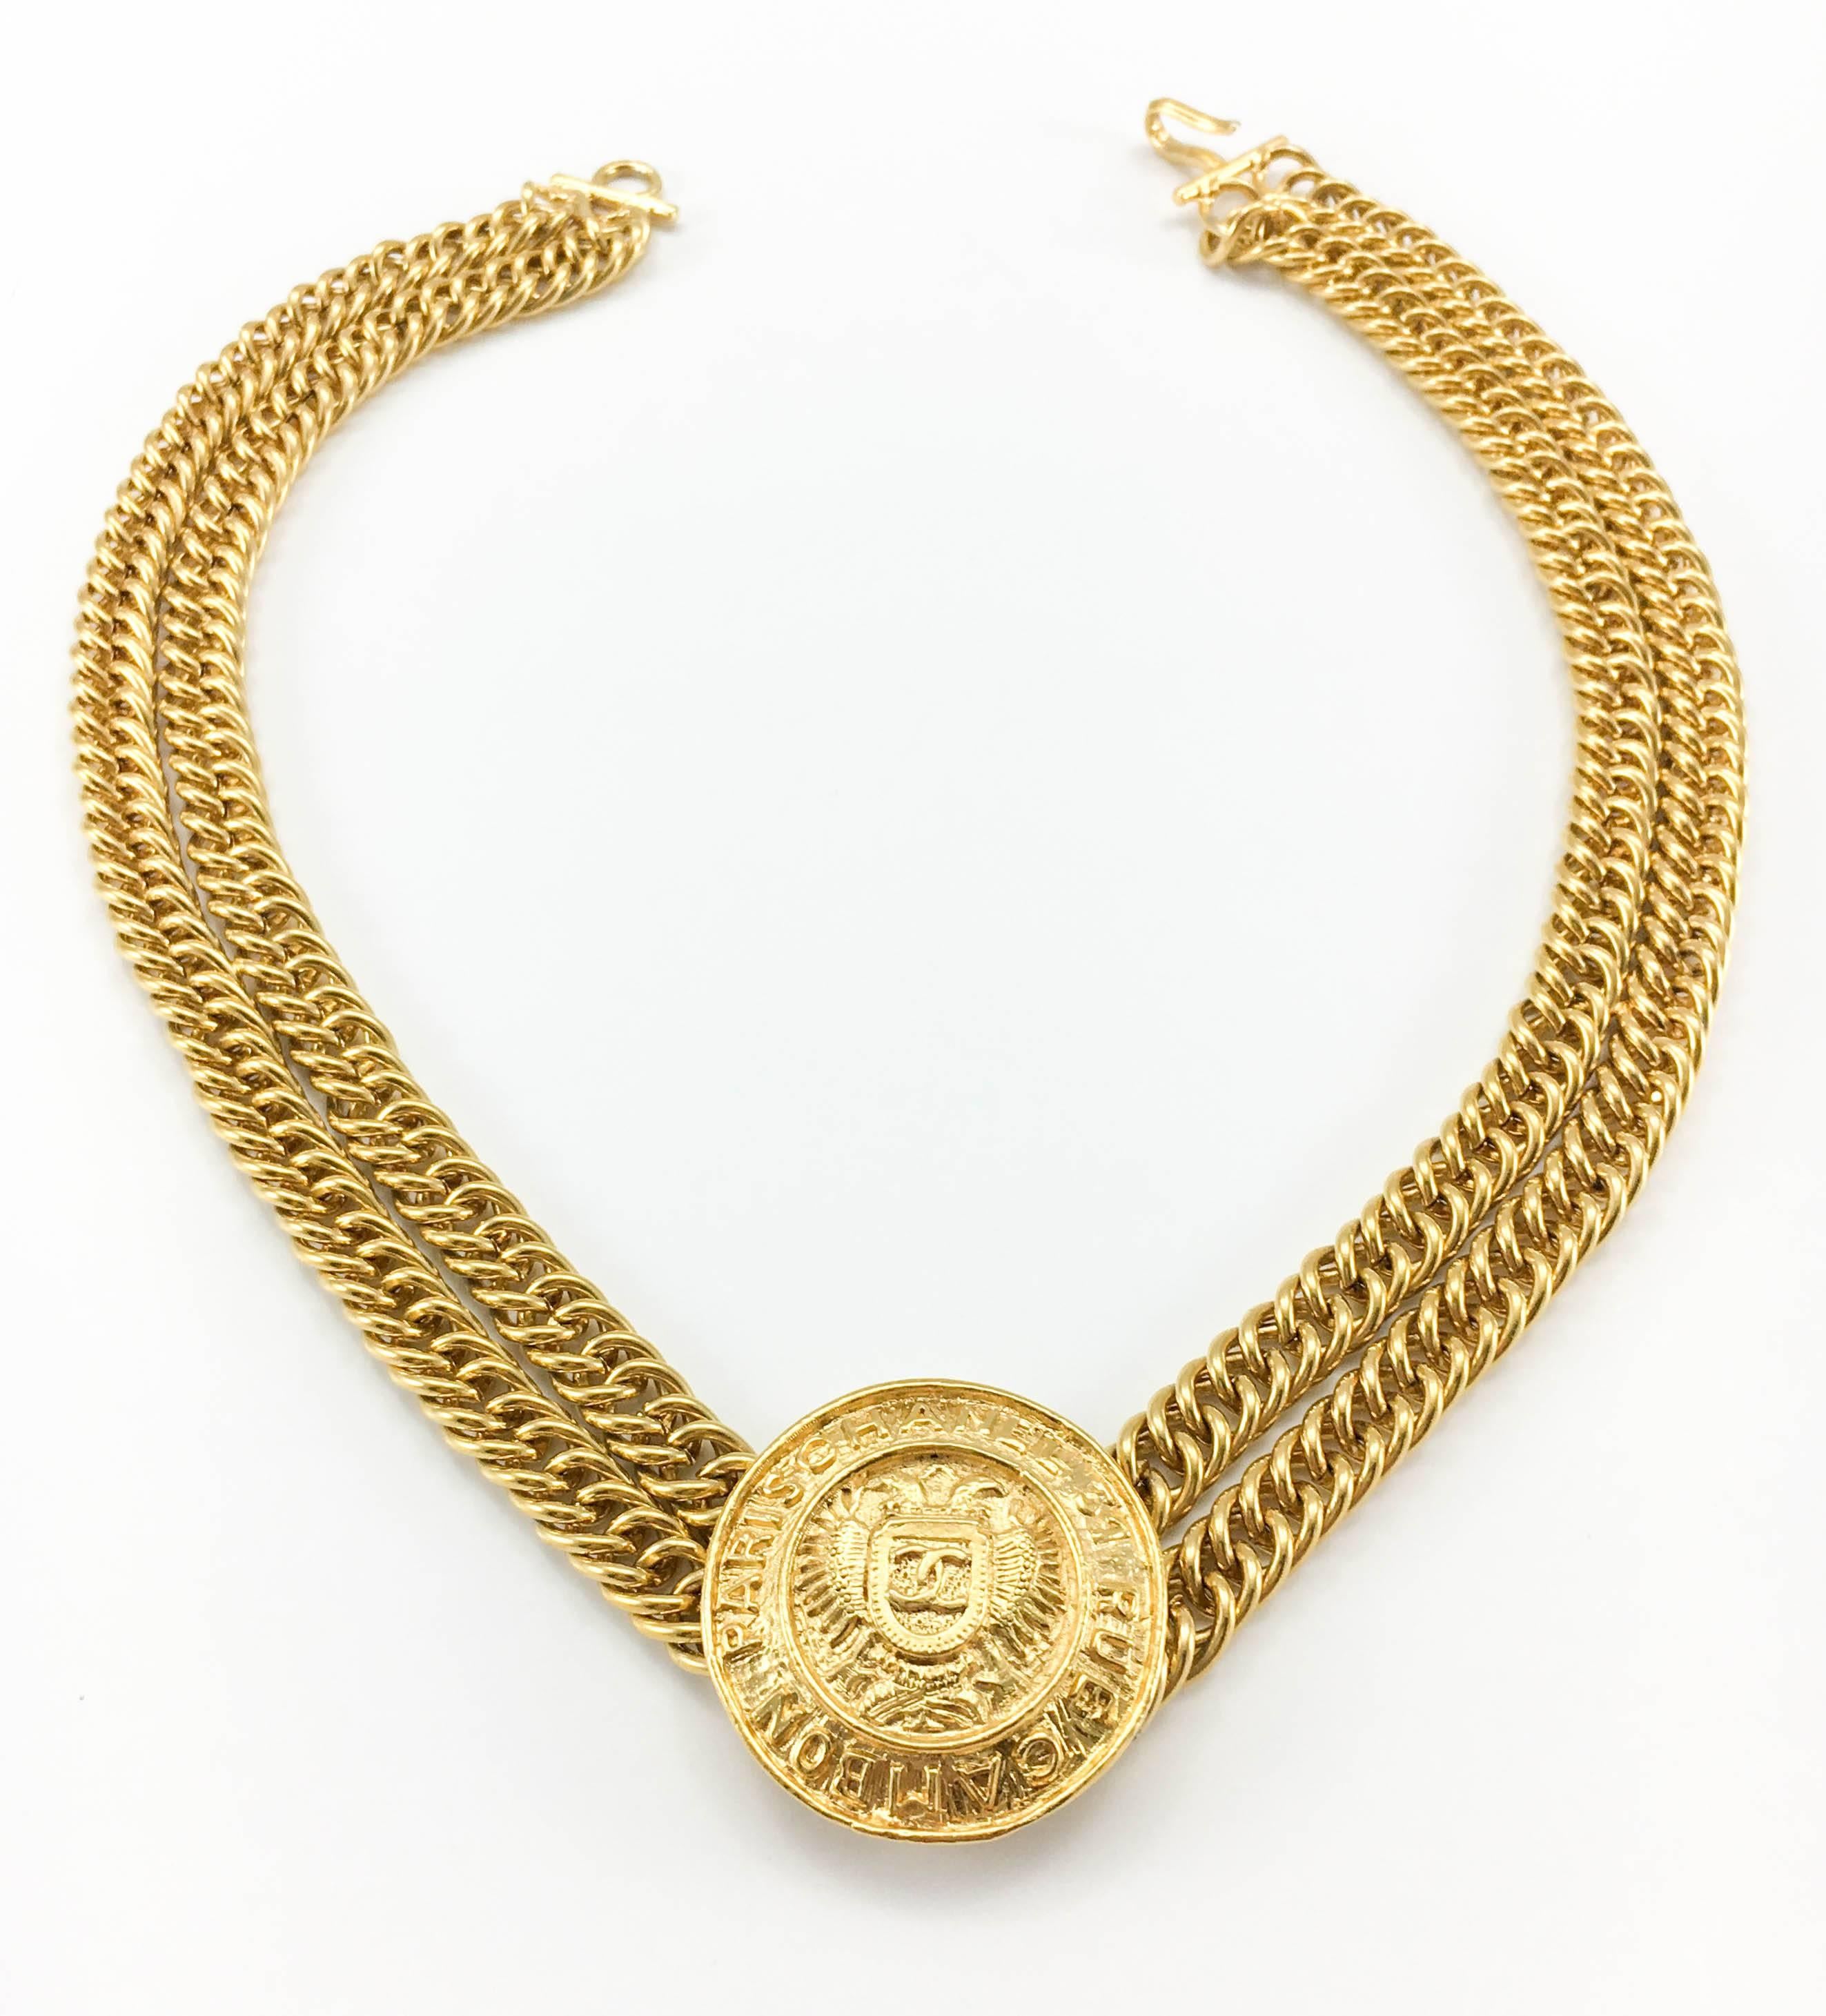 Chanel 'Rue Cambon' Medallion Necklace - Circa 1990 In Excellent Condition In London, Chelsea